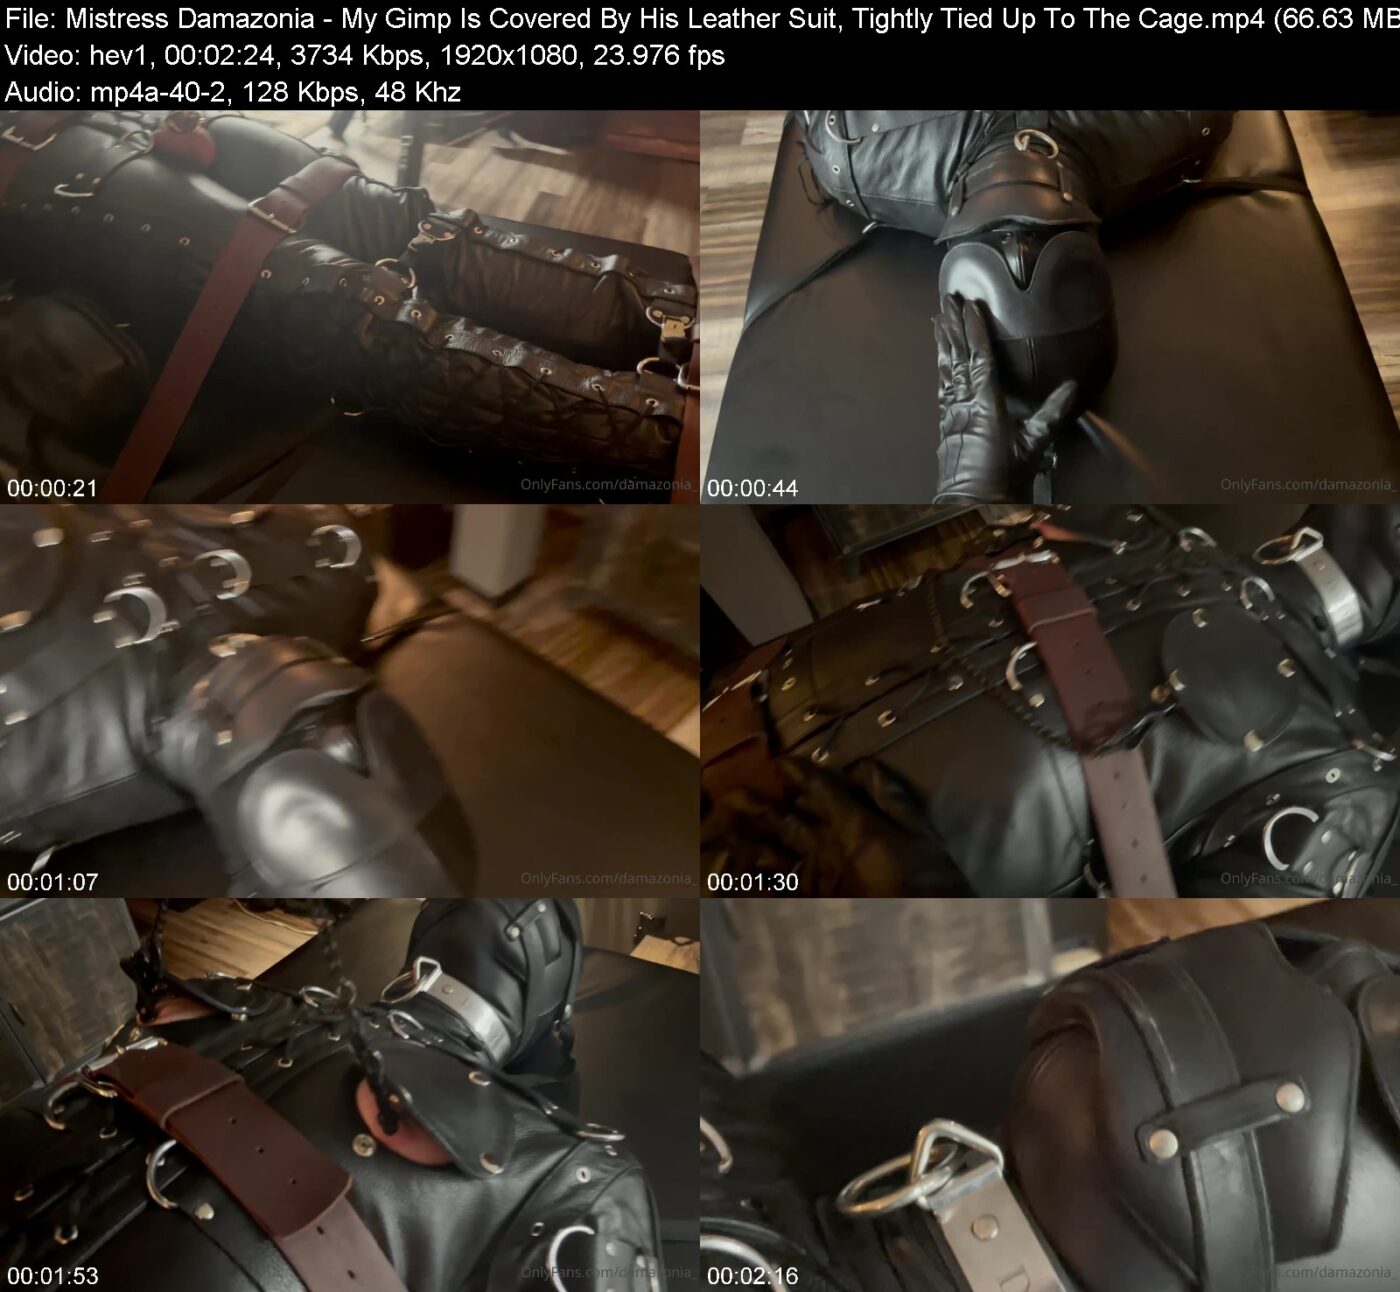 Actress: Mistress Damazonia. Title and Studio: My Gimp Is Covered By His Leather Suit, Tightly Tied Up To The Cage